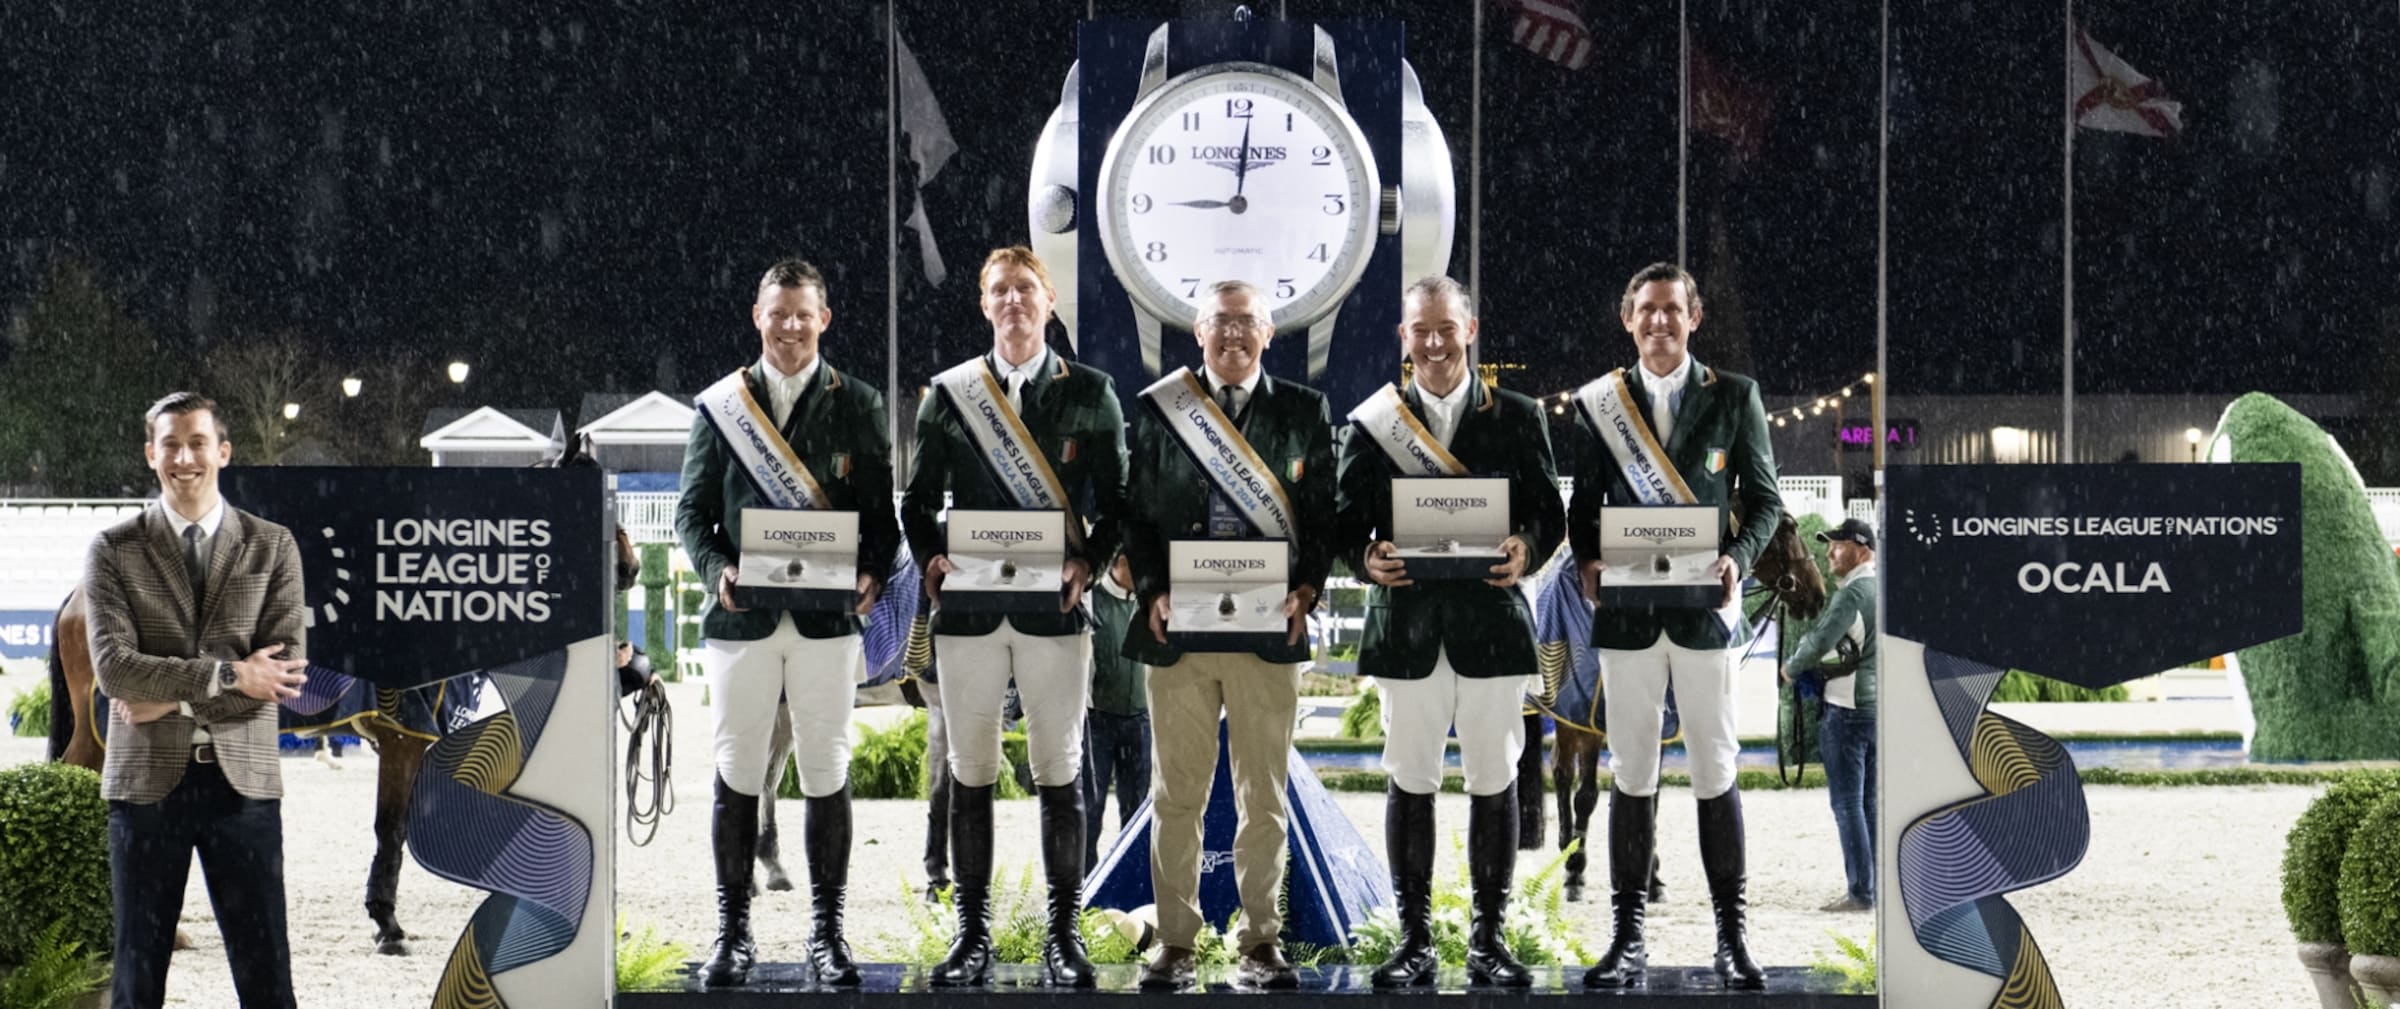 Longines League of Nations_1900x800